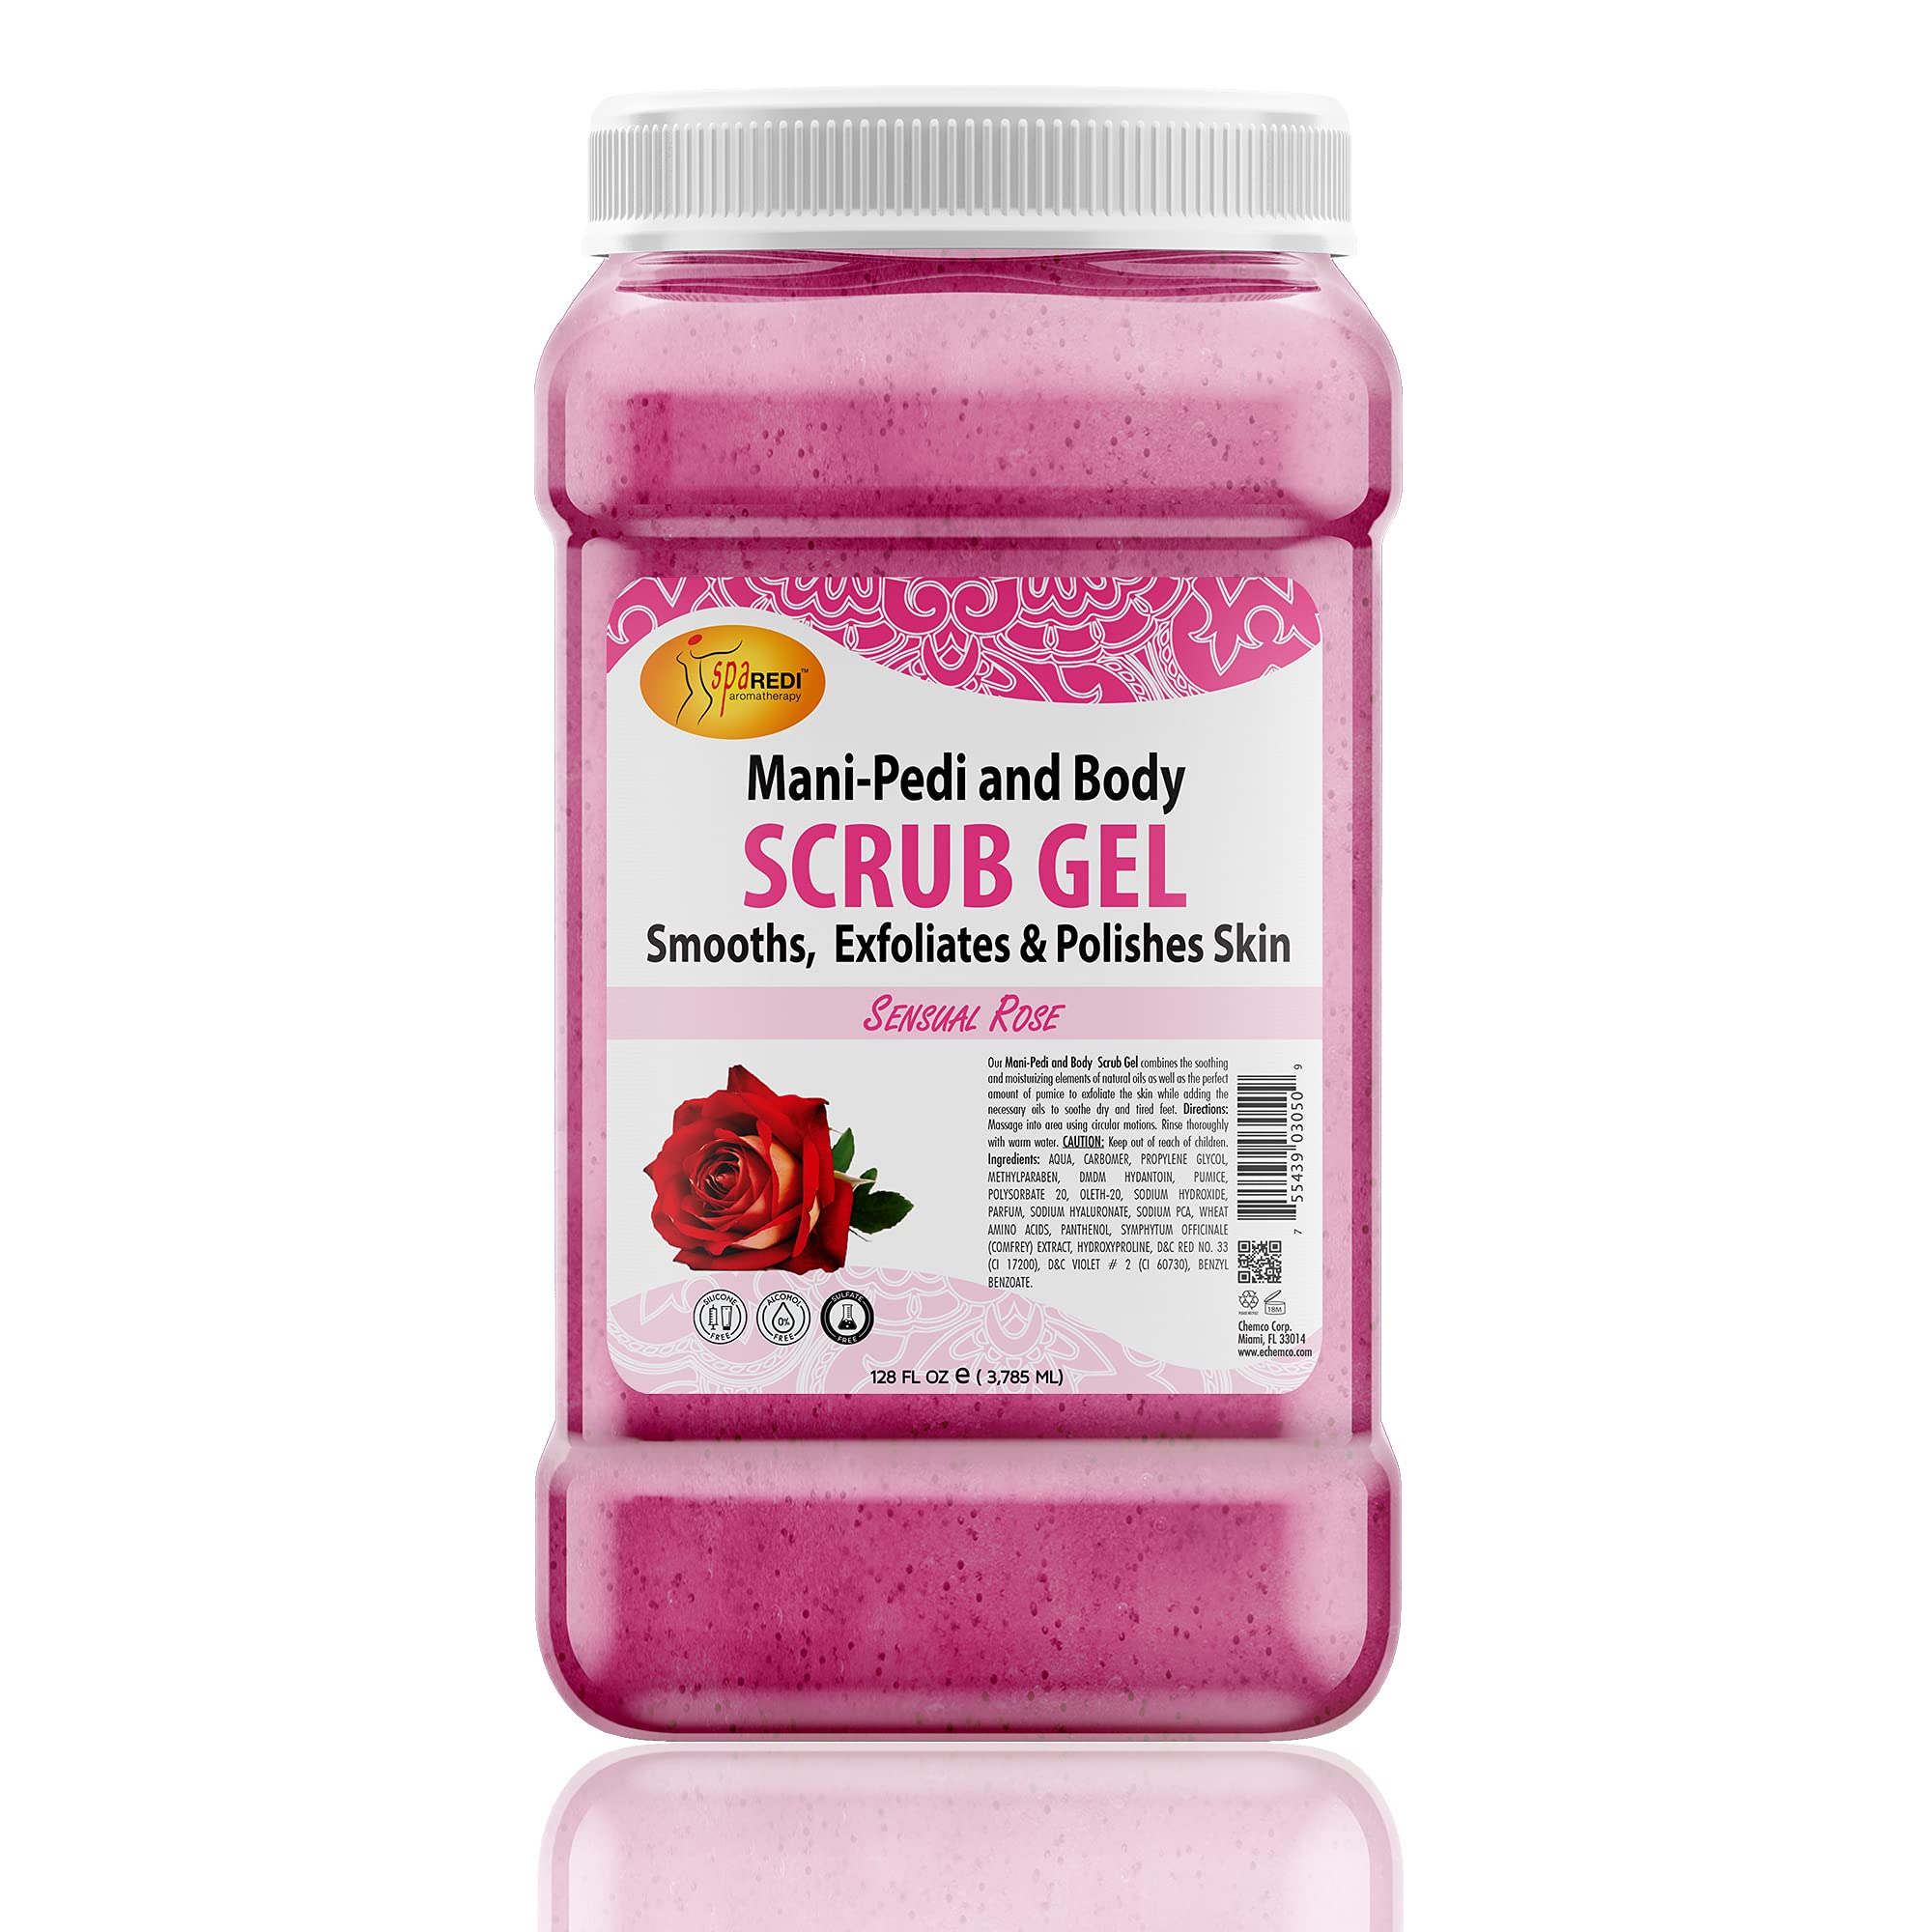 SPA REDI - Exfoliating Scrub Pumice Gel, Sensual Rose, 128 Oz - Manicure, Pedicure and Body Exfoliator Infused with Hyaluronic Acid, Amino Acids, Panthenol and Comfrey Extract - Glow, Polish, Smooth and Moisture Skin - Body, Hand and Foot